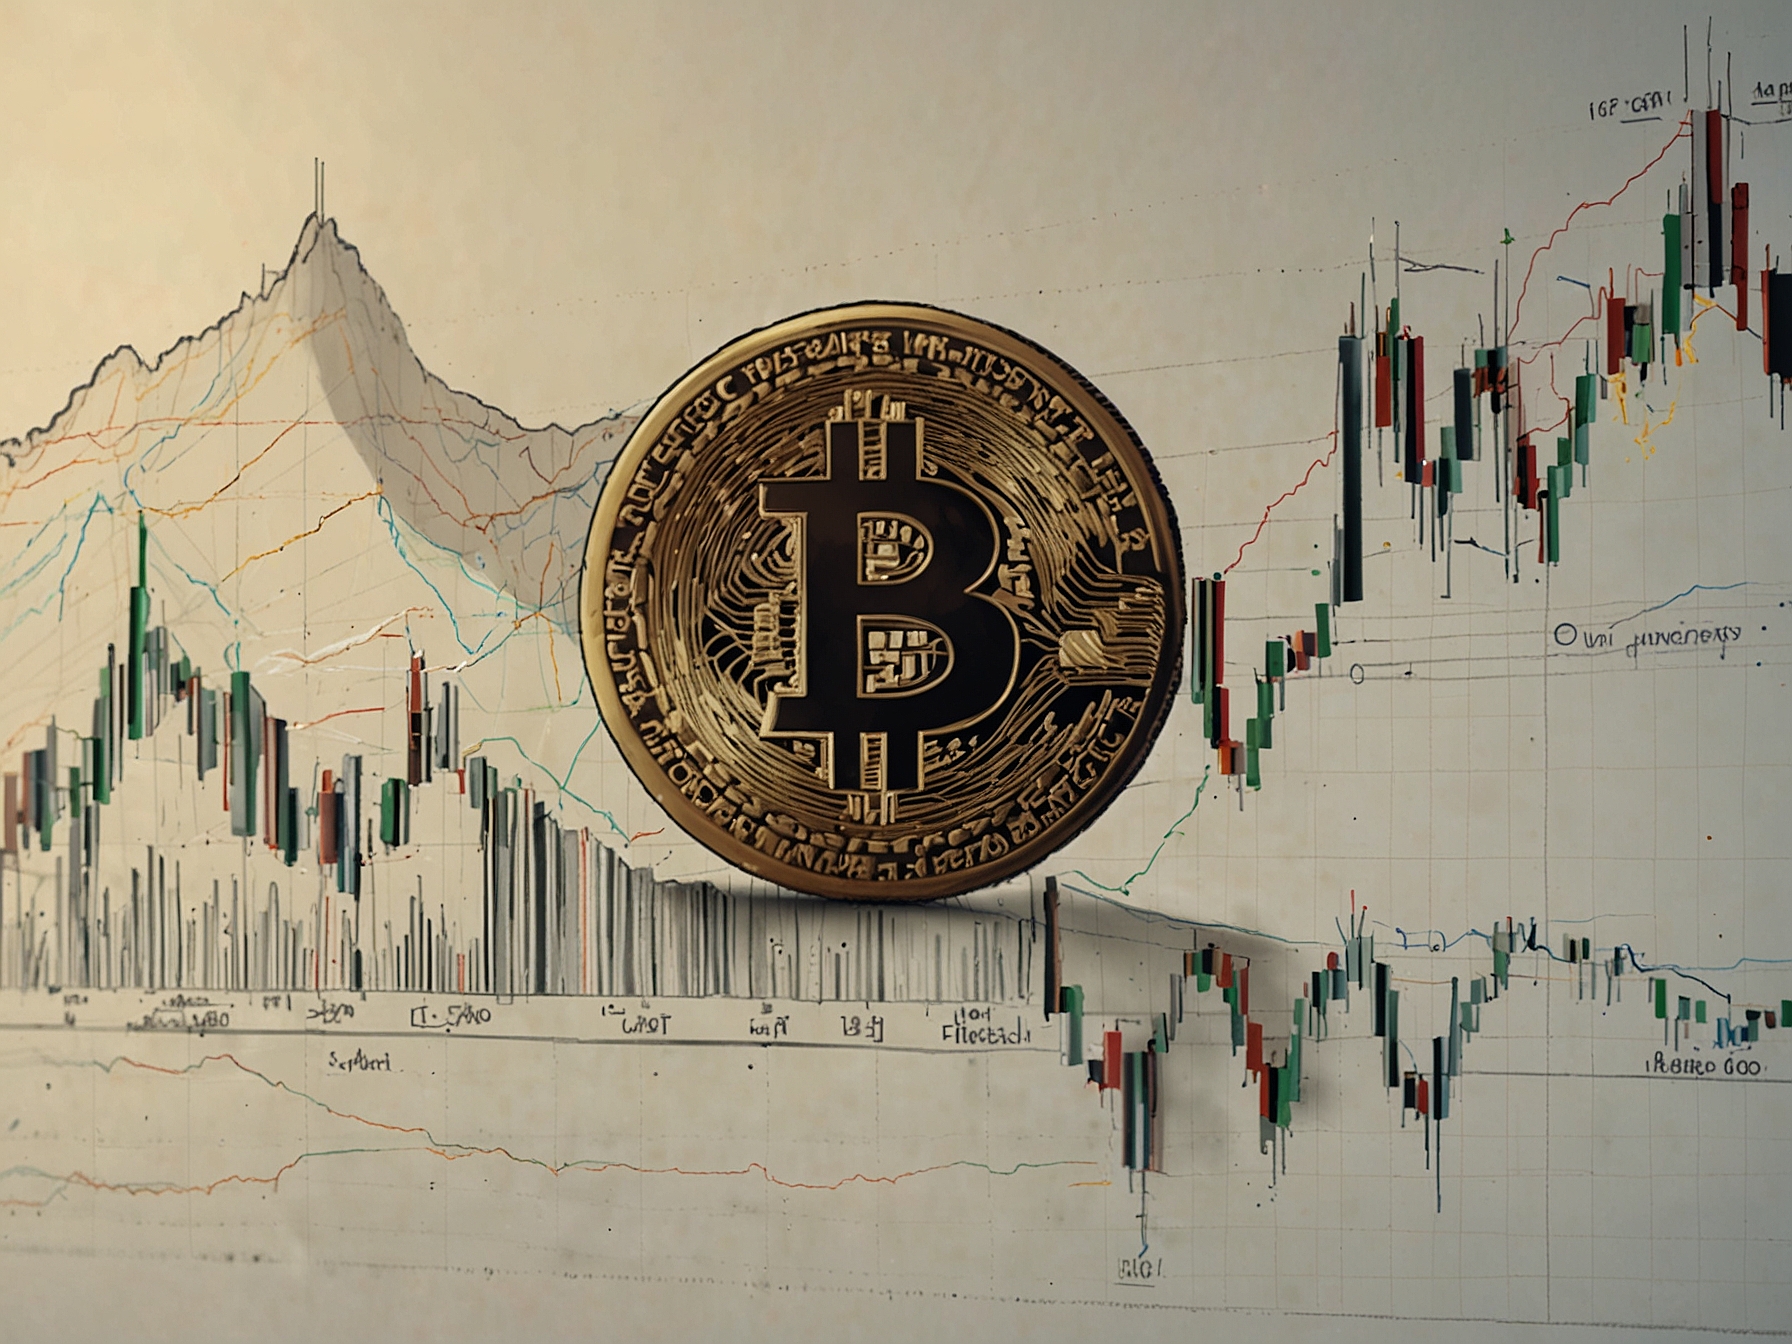 A fluctuating Bitcoin price chart showcasing the cryptocurrency's volatility and Thiel's cautious outlook in the backdrop of evolving regulatory landscapes.